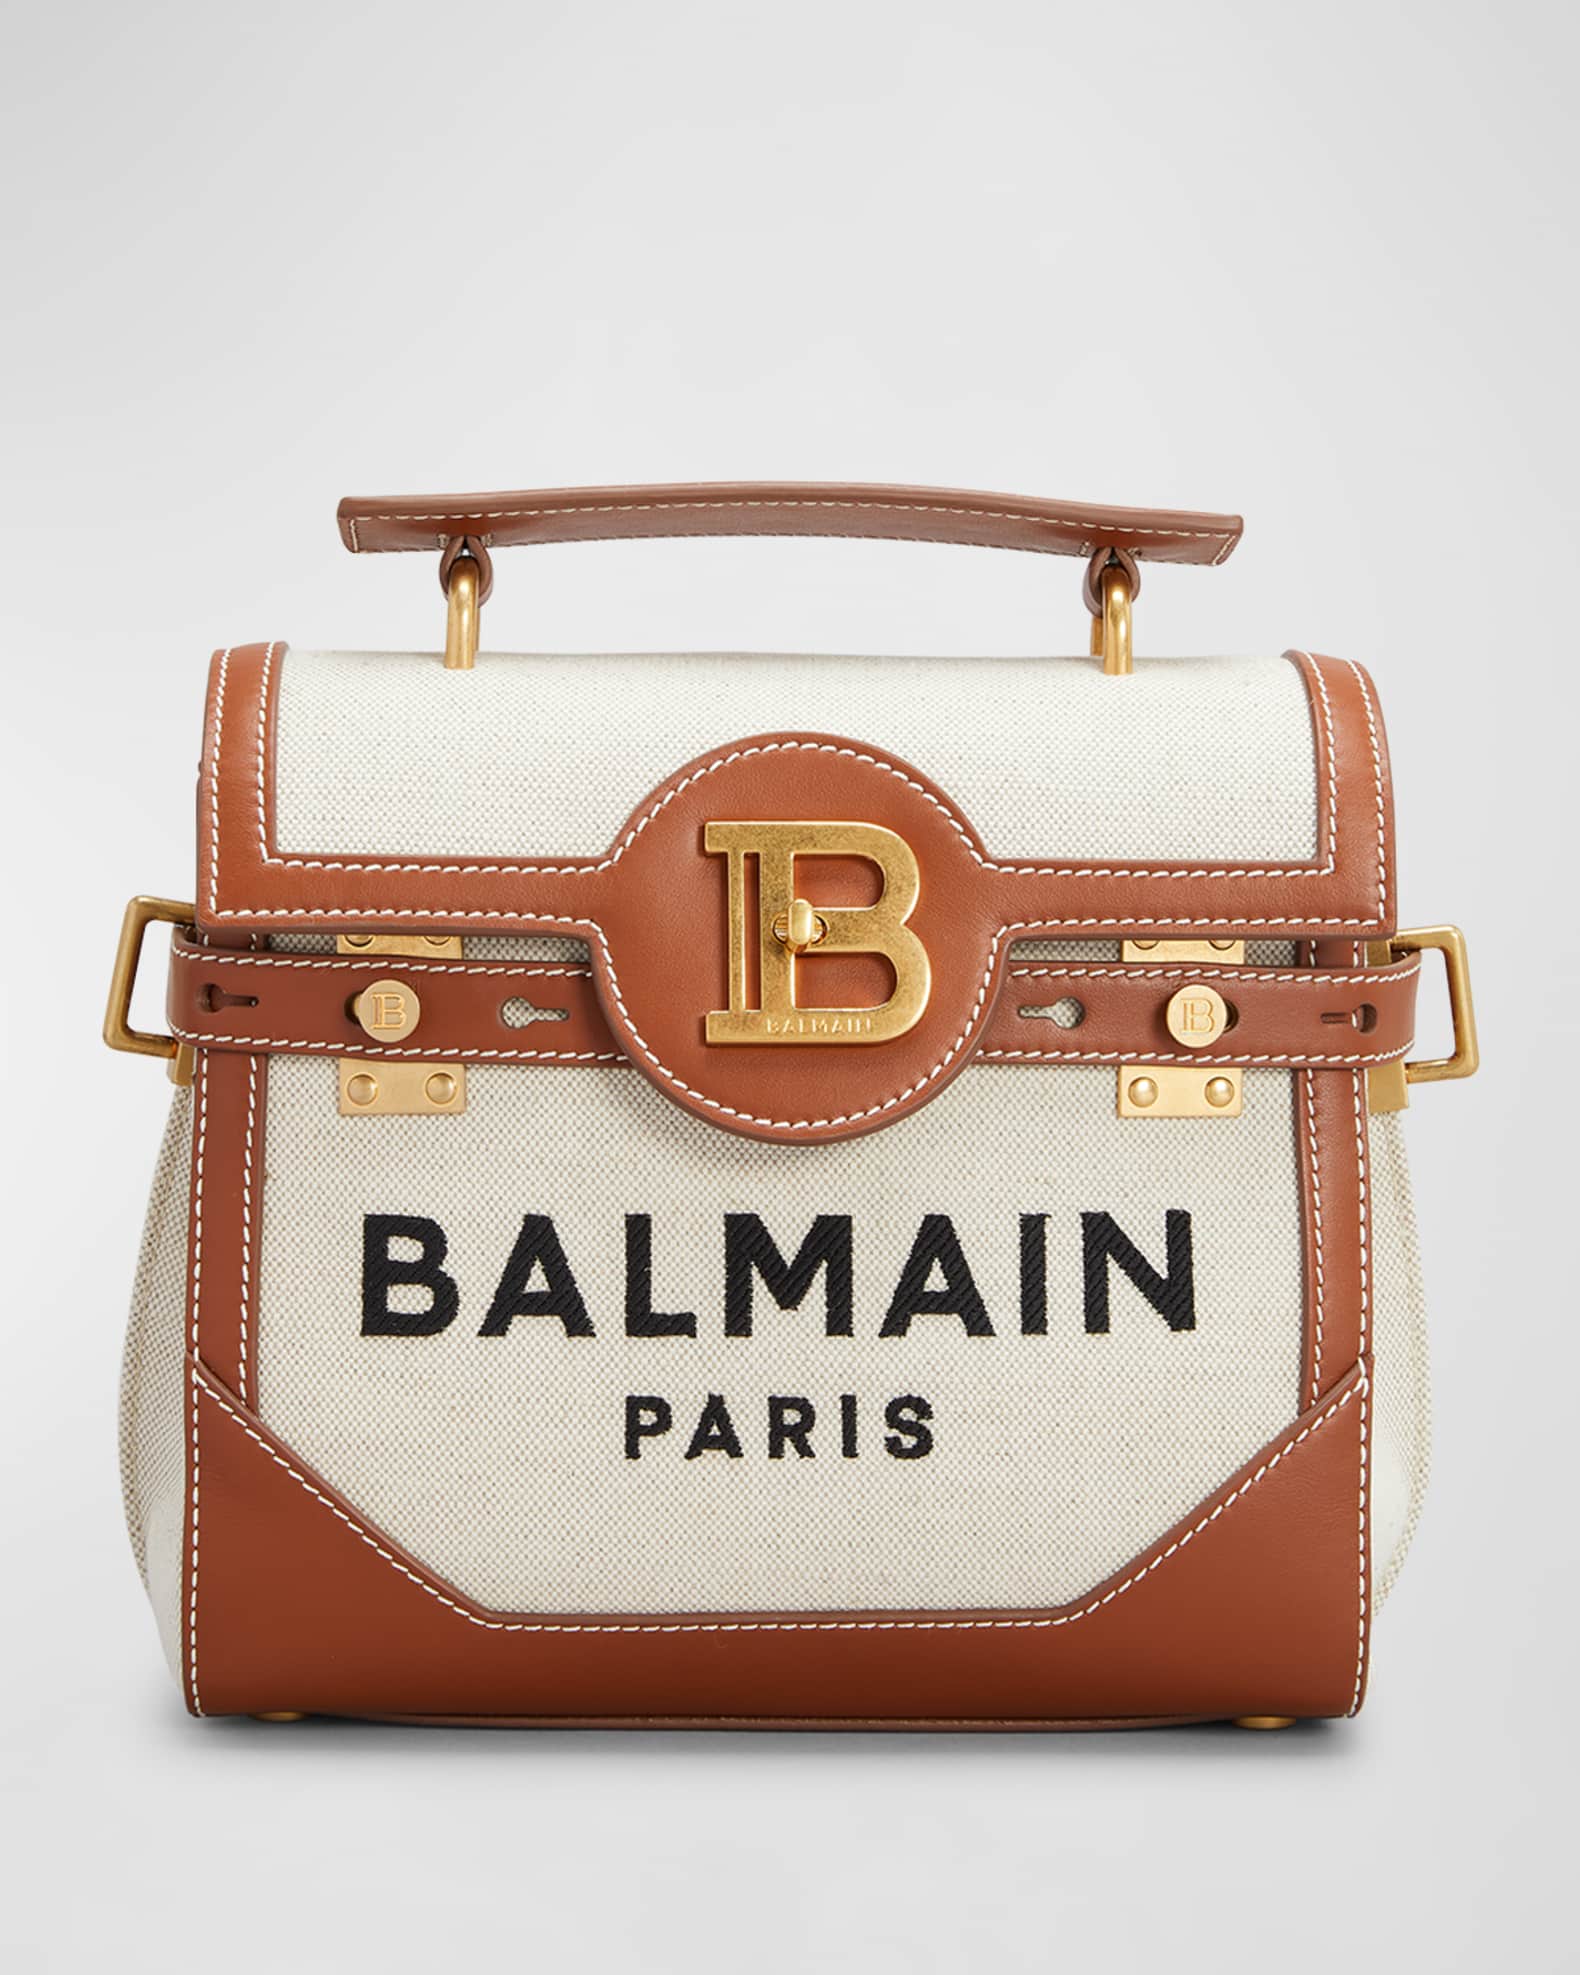 Balmain BBuzz 23 Top-Handle Bag in Canvas and Leather | Neiman Marcus